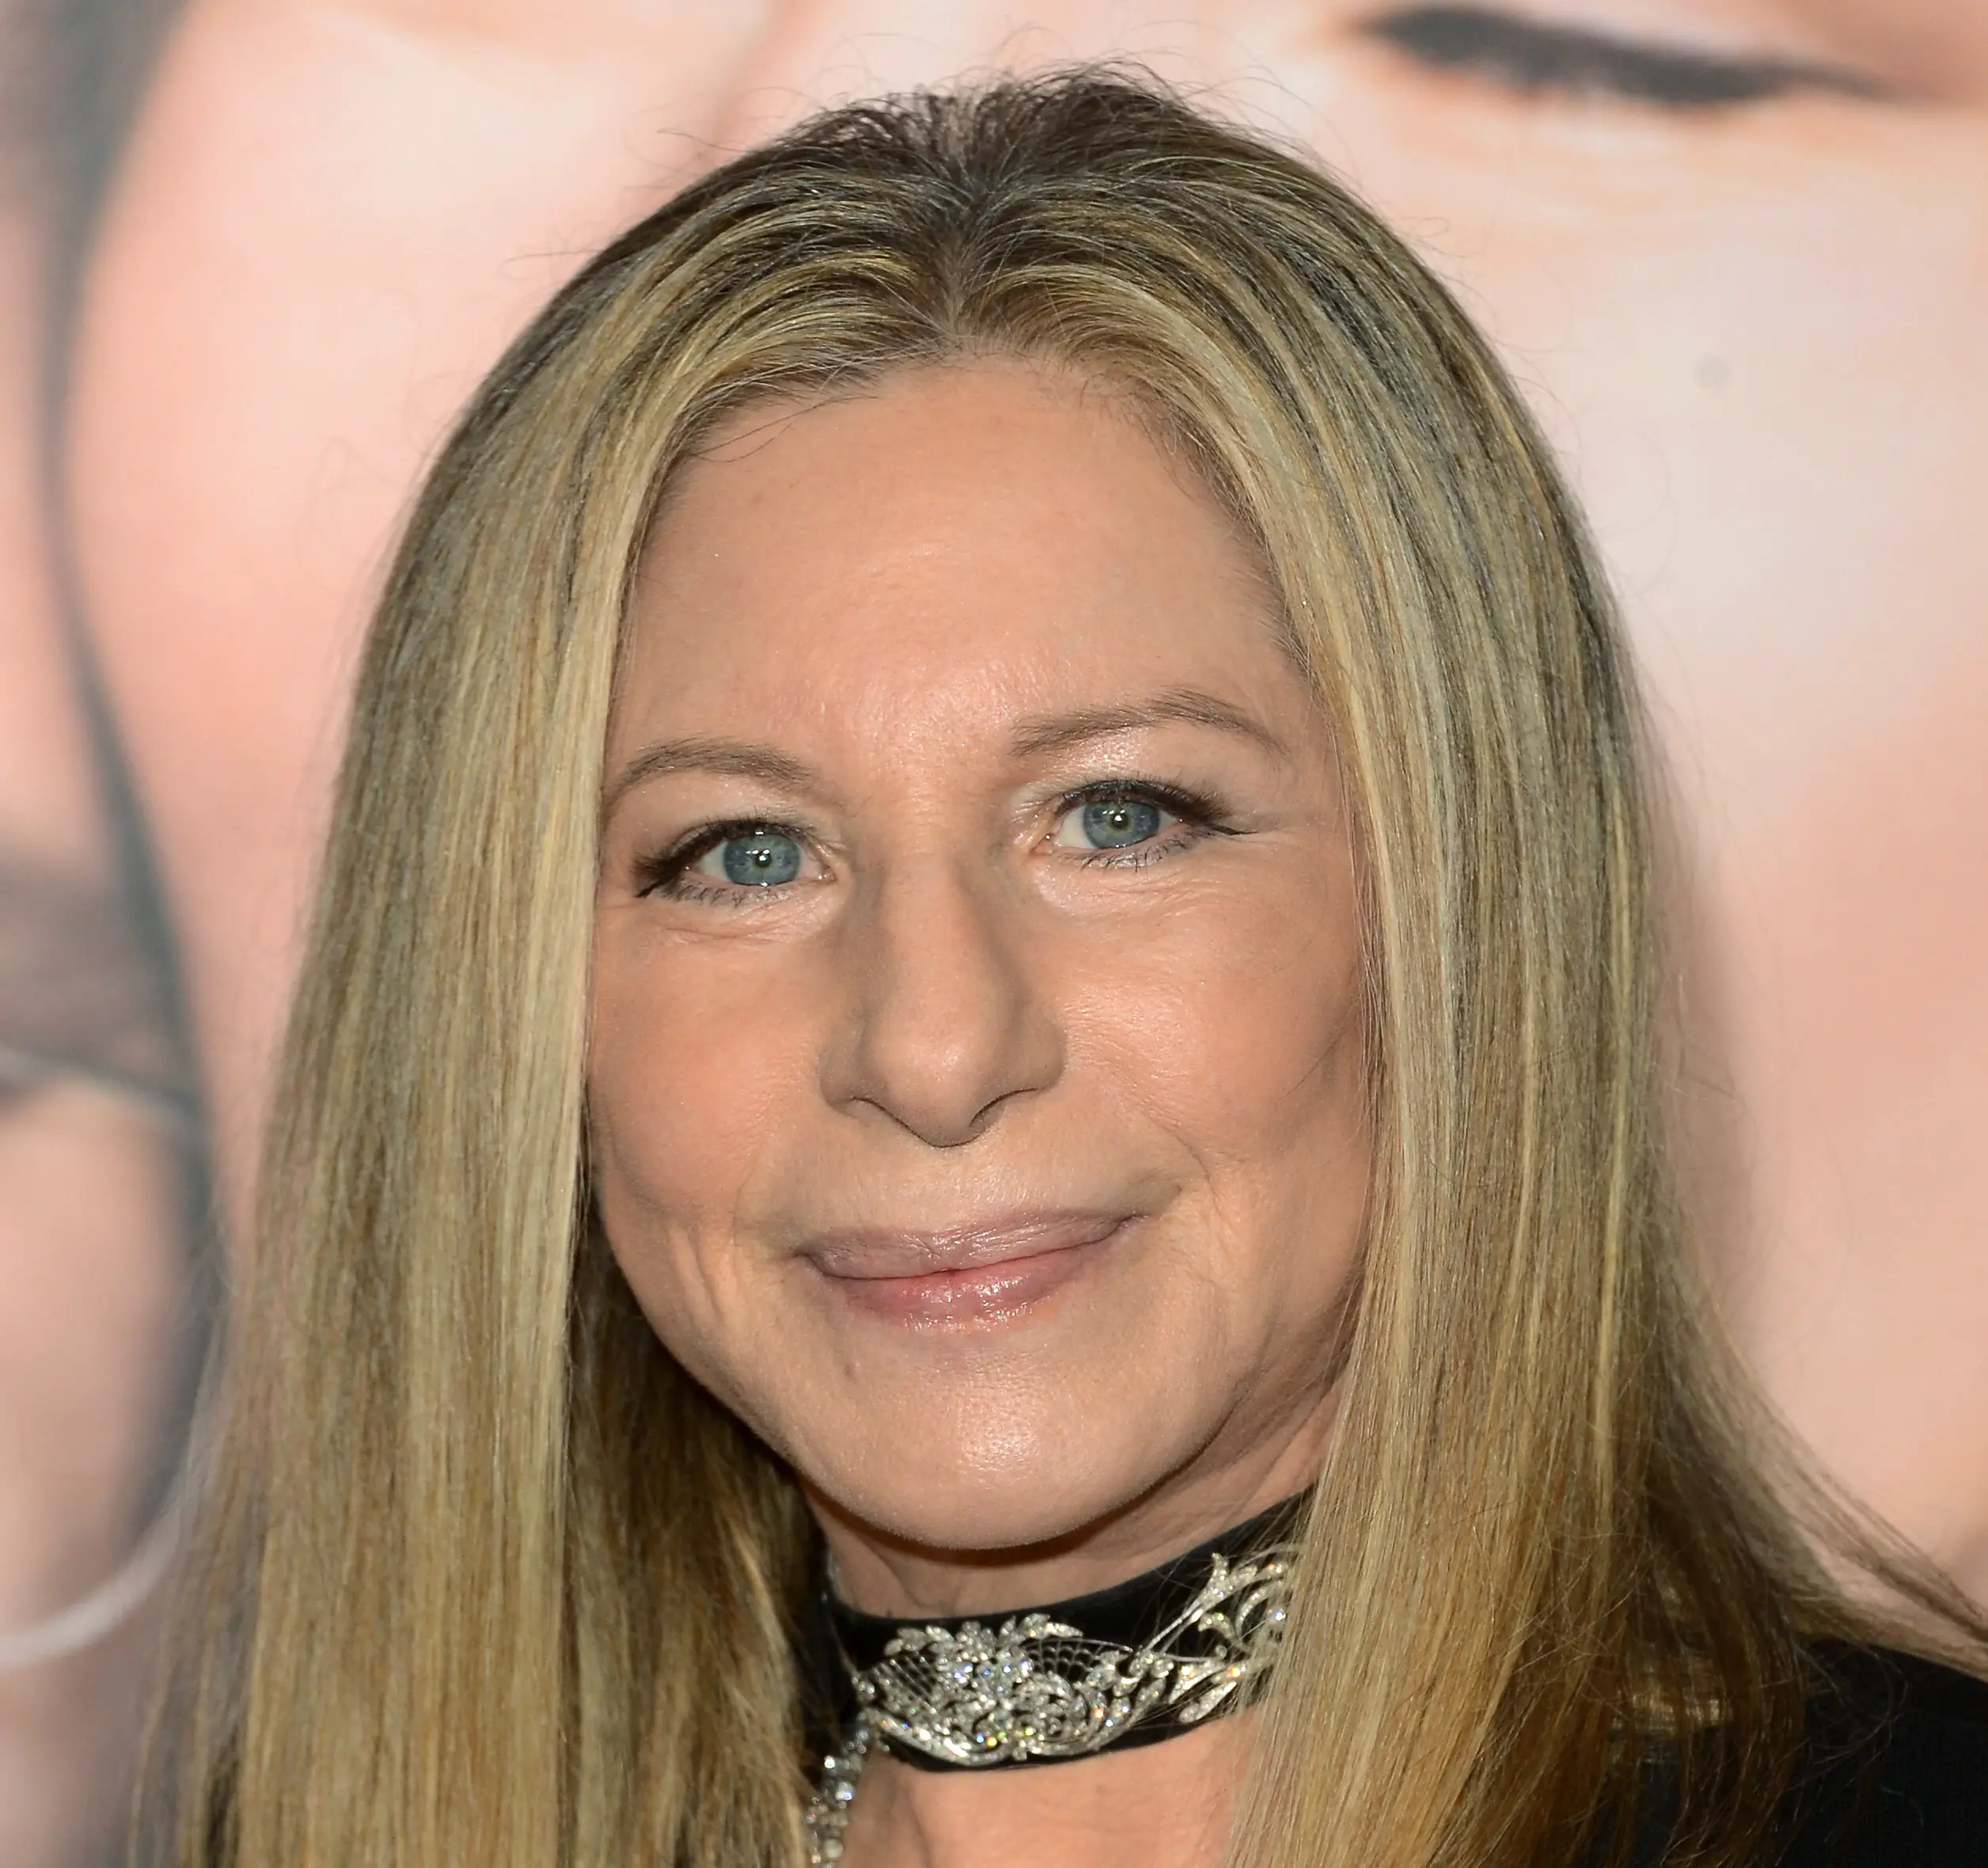 Barbra Streisand Plastic Surgery Before and After Botox